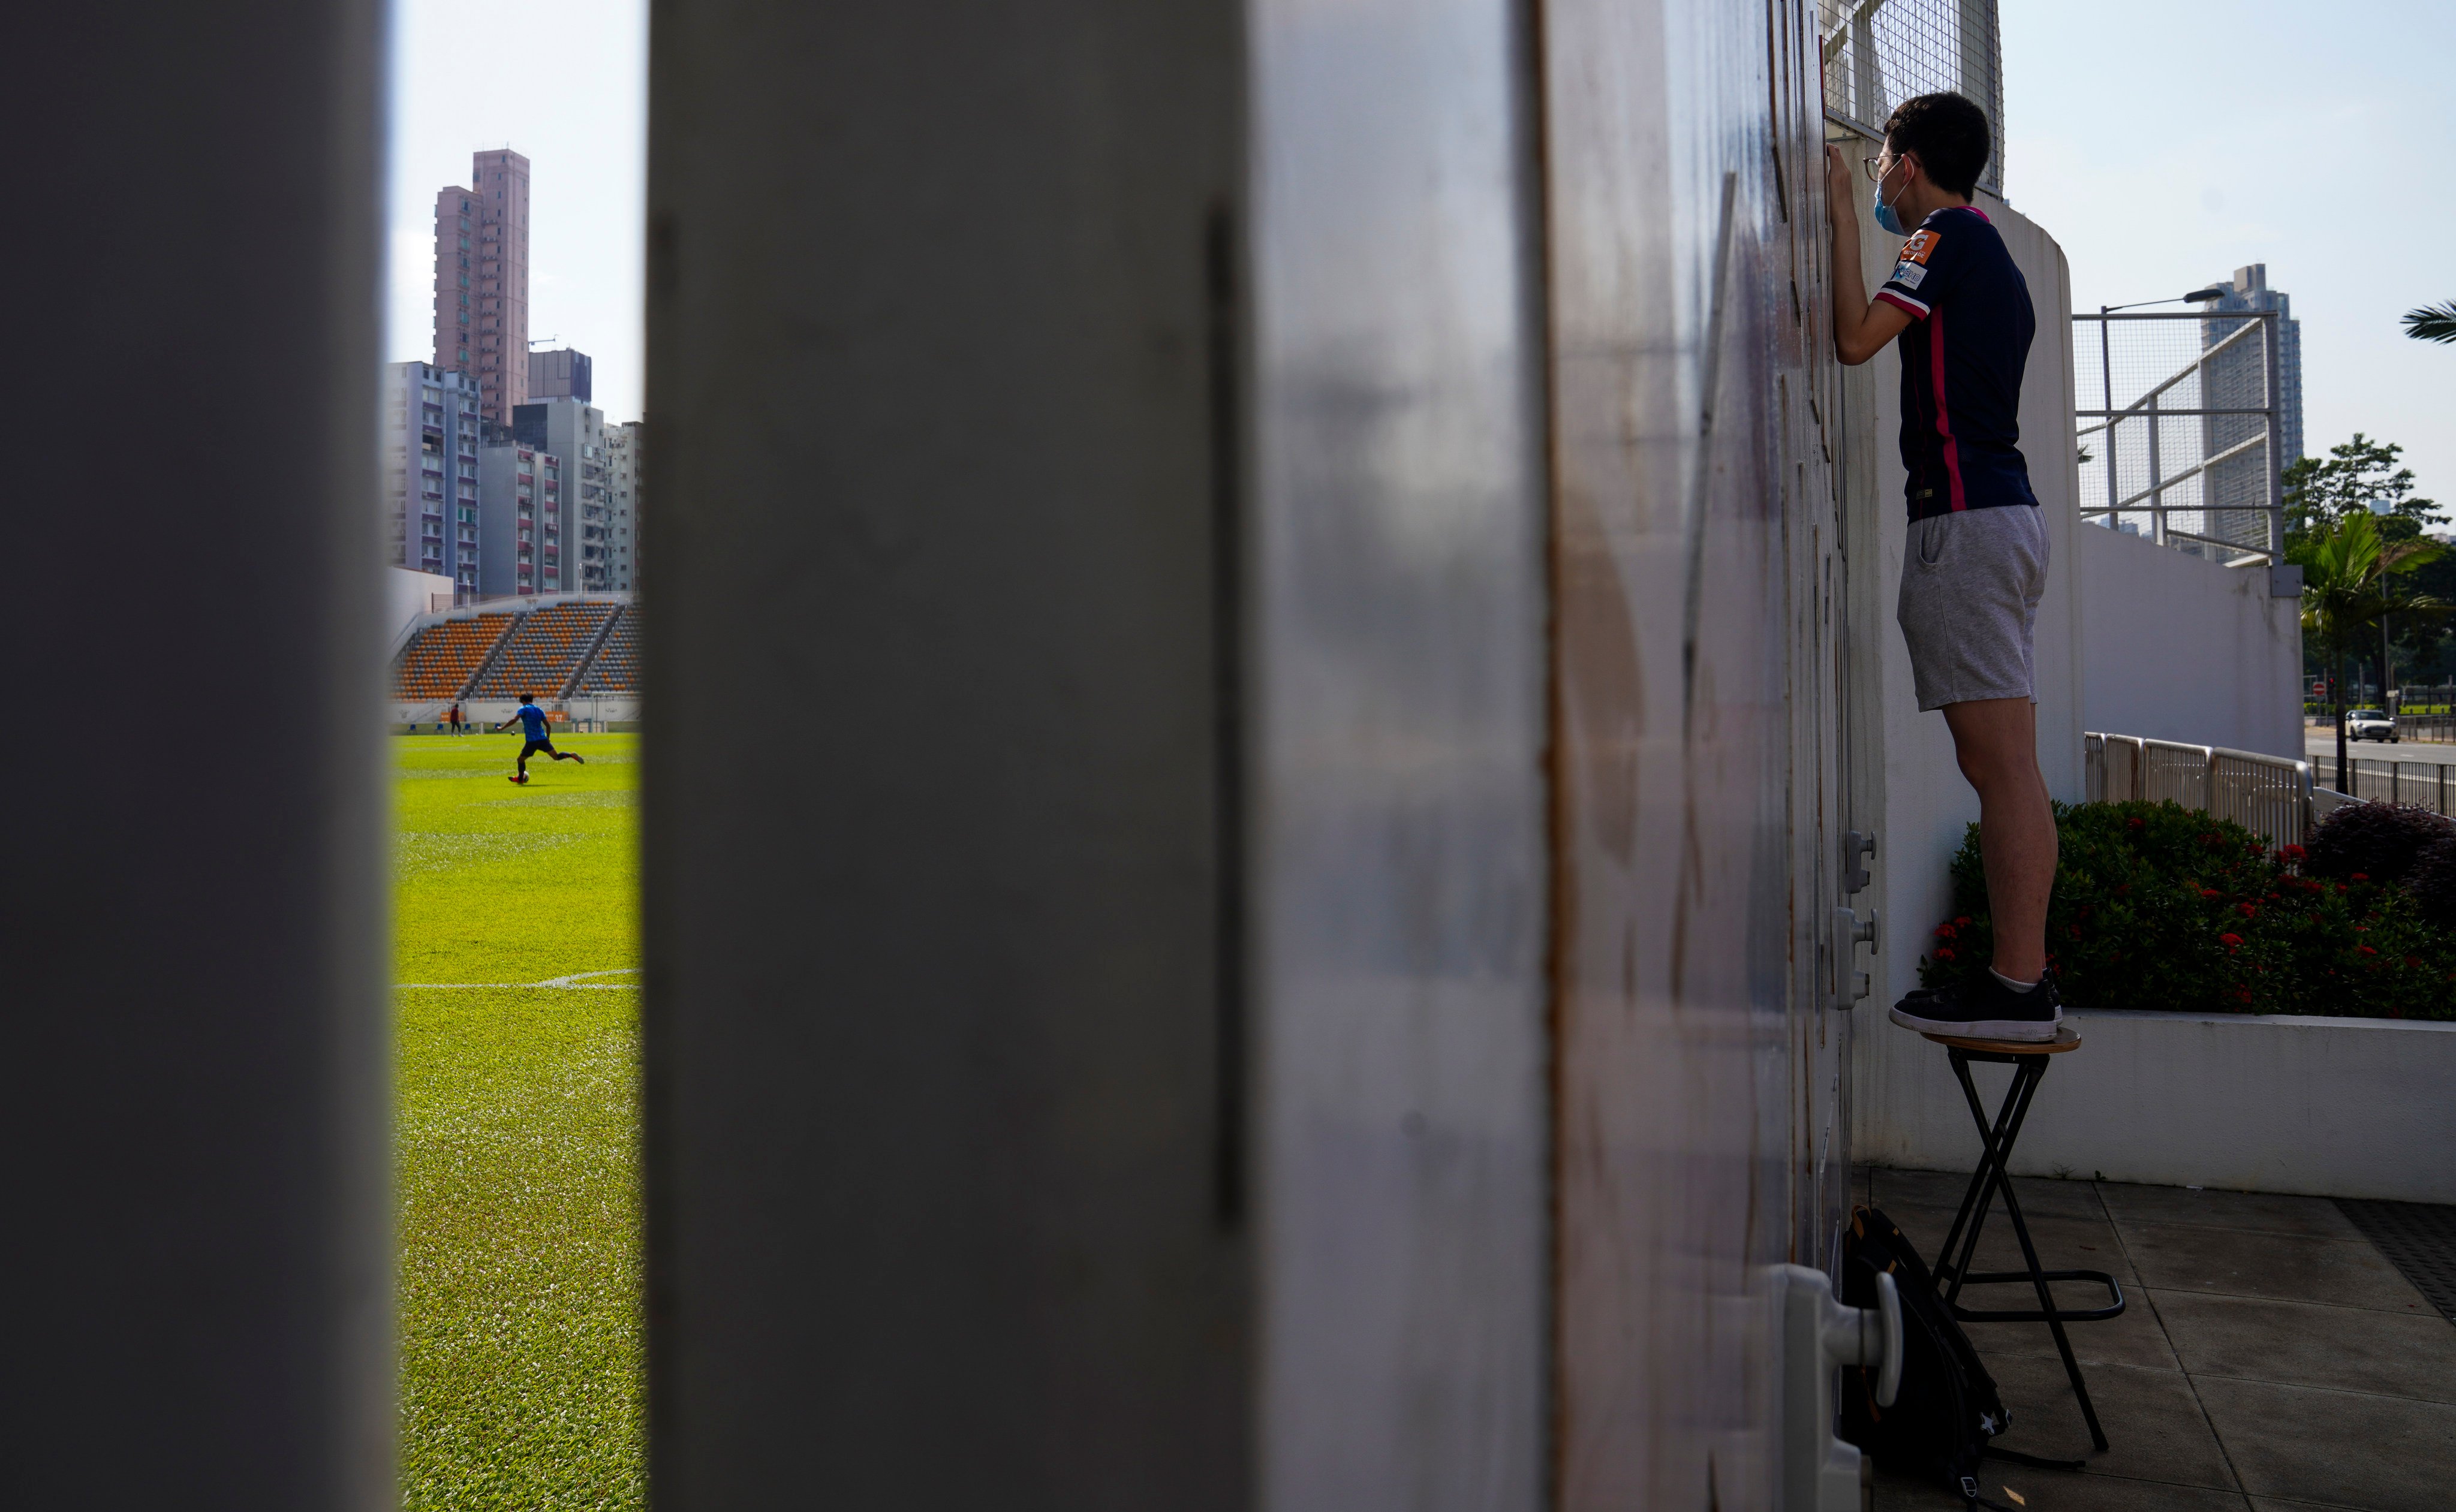 A football fan tries to get a glimpse of a closed-door match at Mong Kok Stadium in October 2020, during the pandemic. Though no longer in its heyday, Hong Kong football still draws some diehard fans. Photo: Sam Tsang